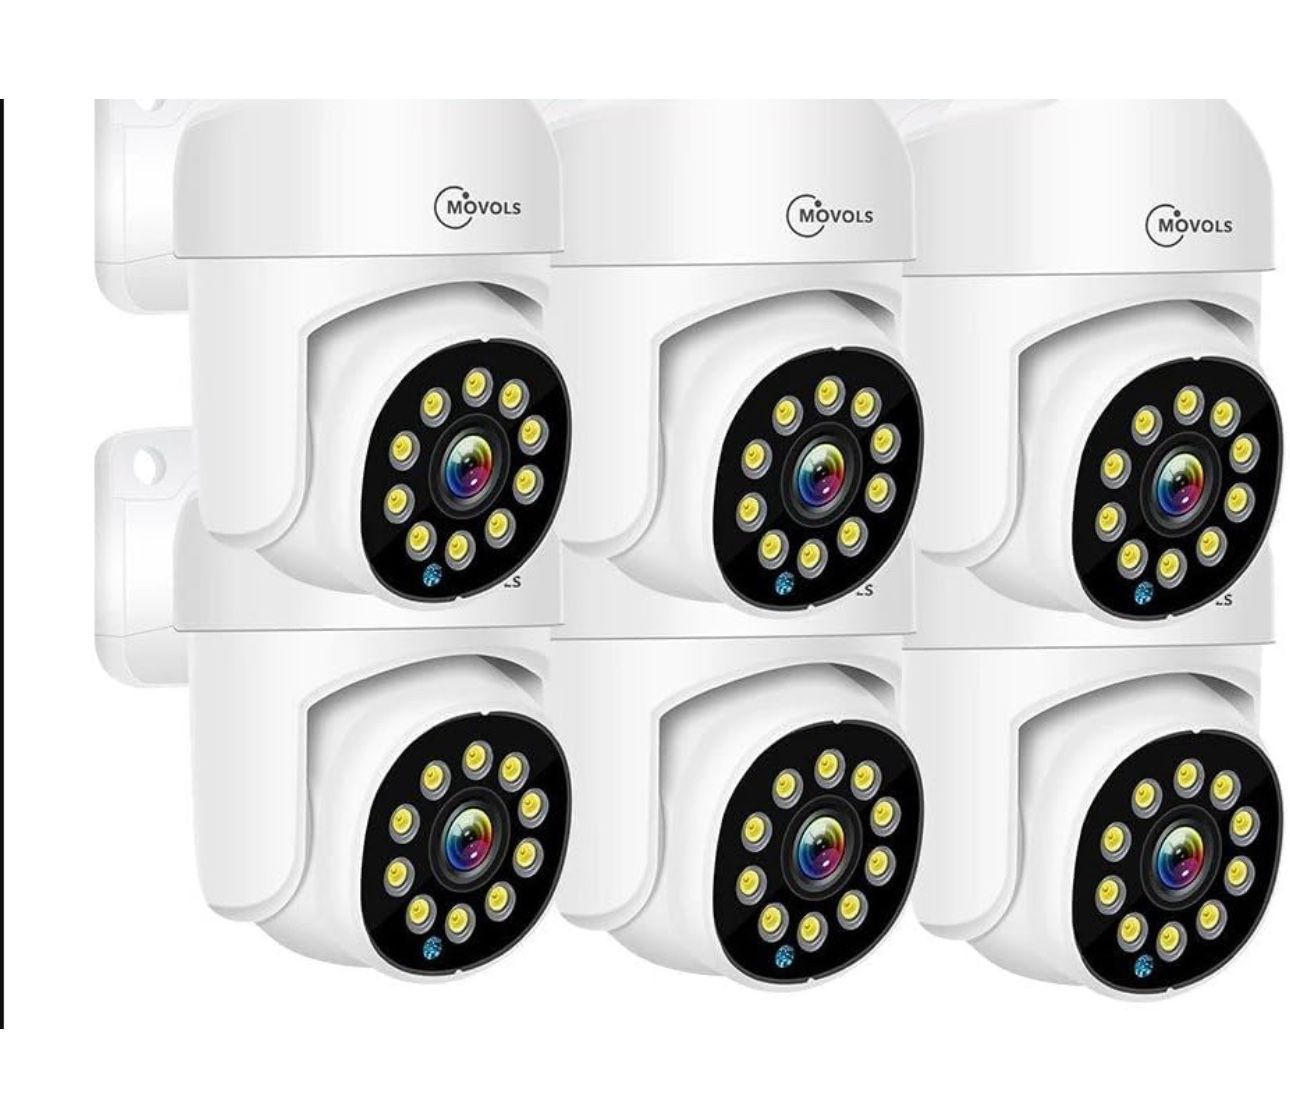 IP Camera System for Home Security, 8 Channels 720P HD Video, 1080P Recording, Night Vision, Motion Detection with 6X Cameras